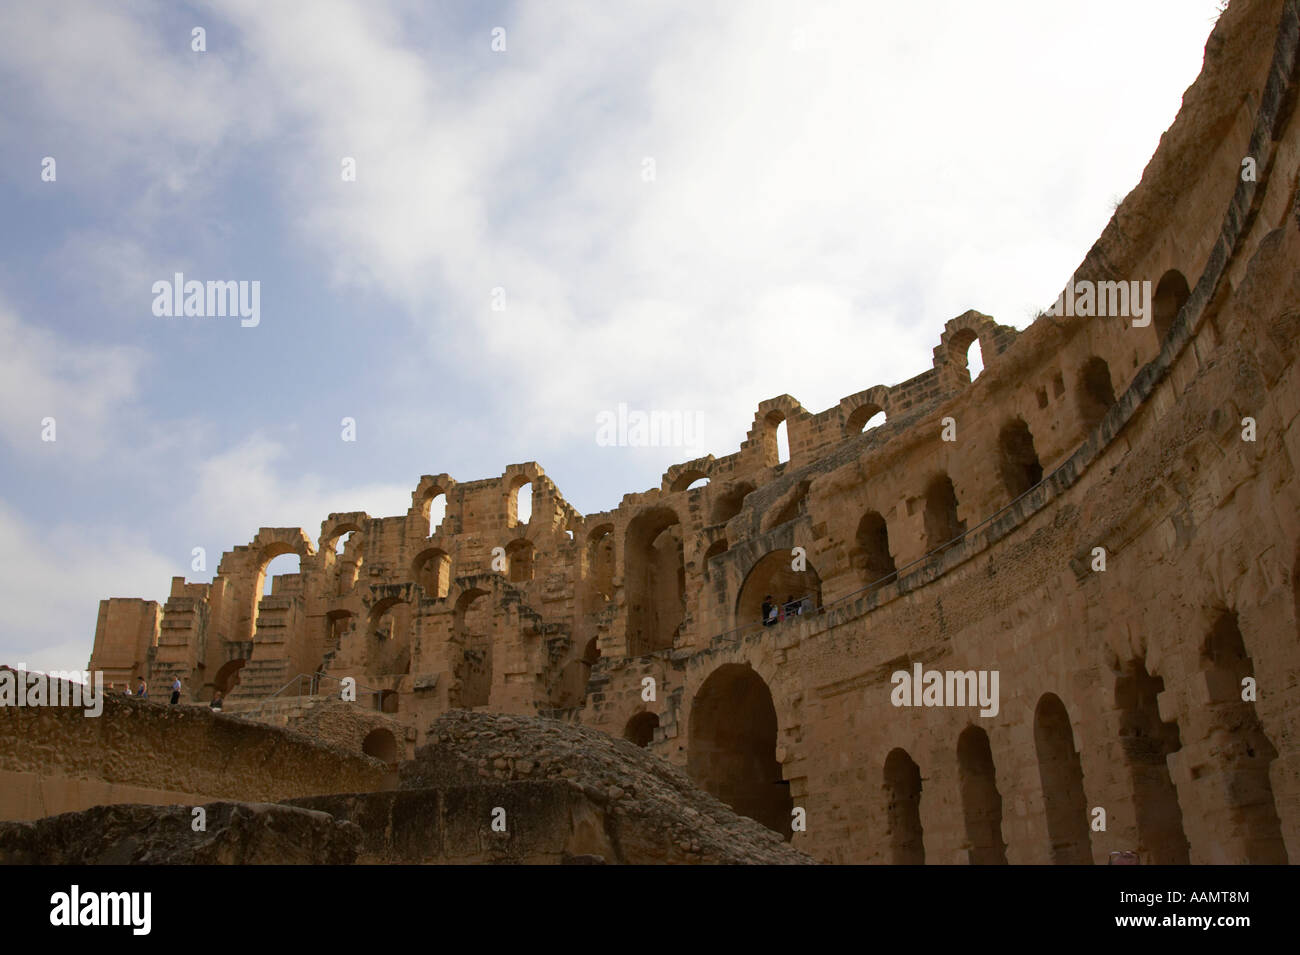 upper tiers of the old roman colloseum from the inside looking up at blue cloudy sky at el jem tunisia Stock Photo